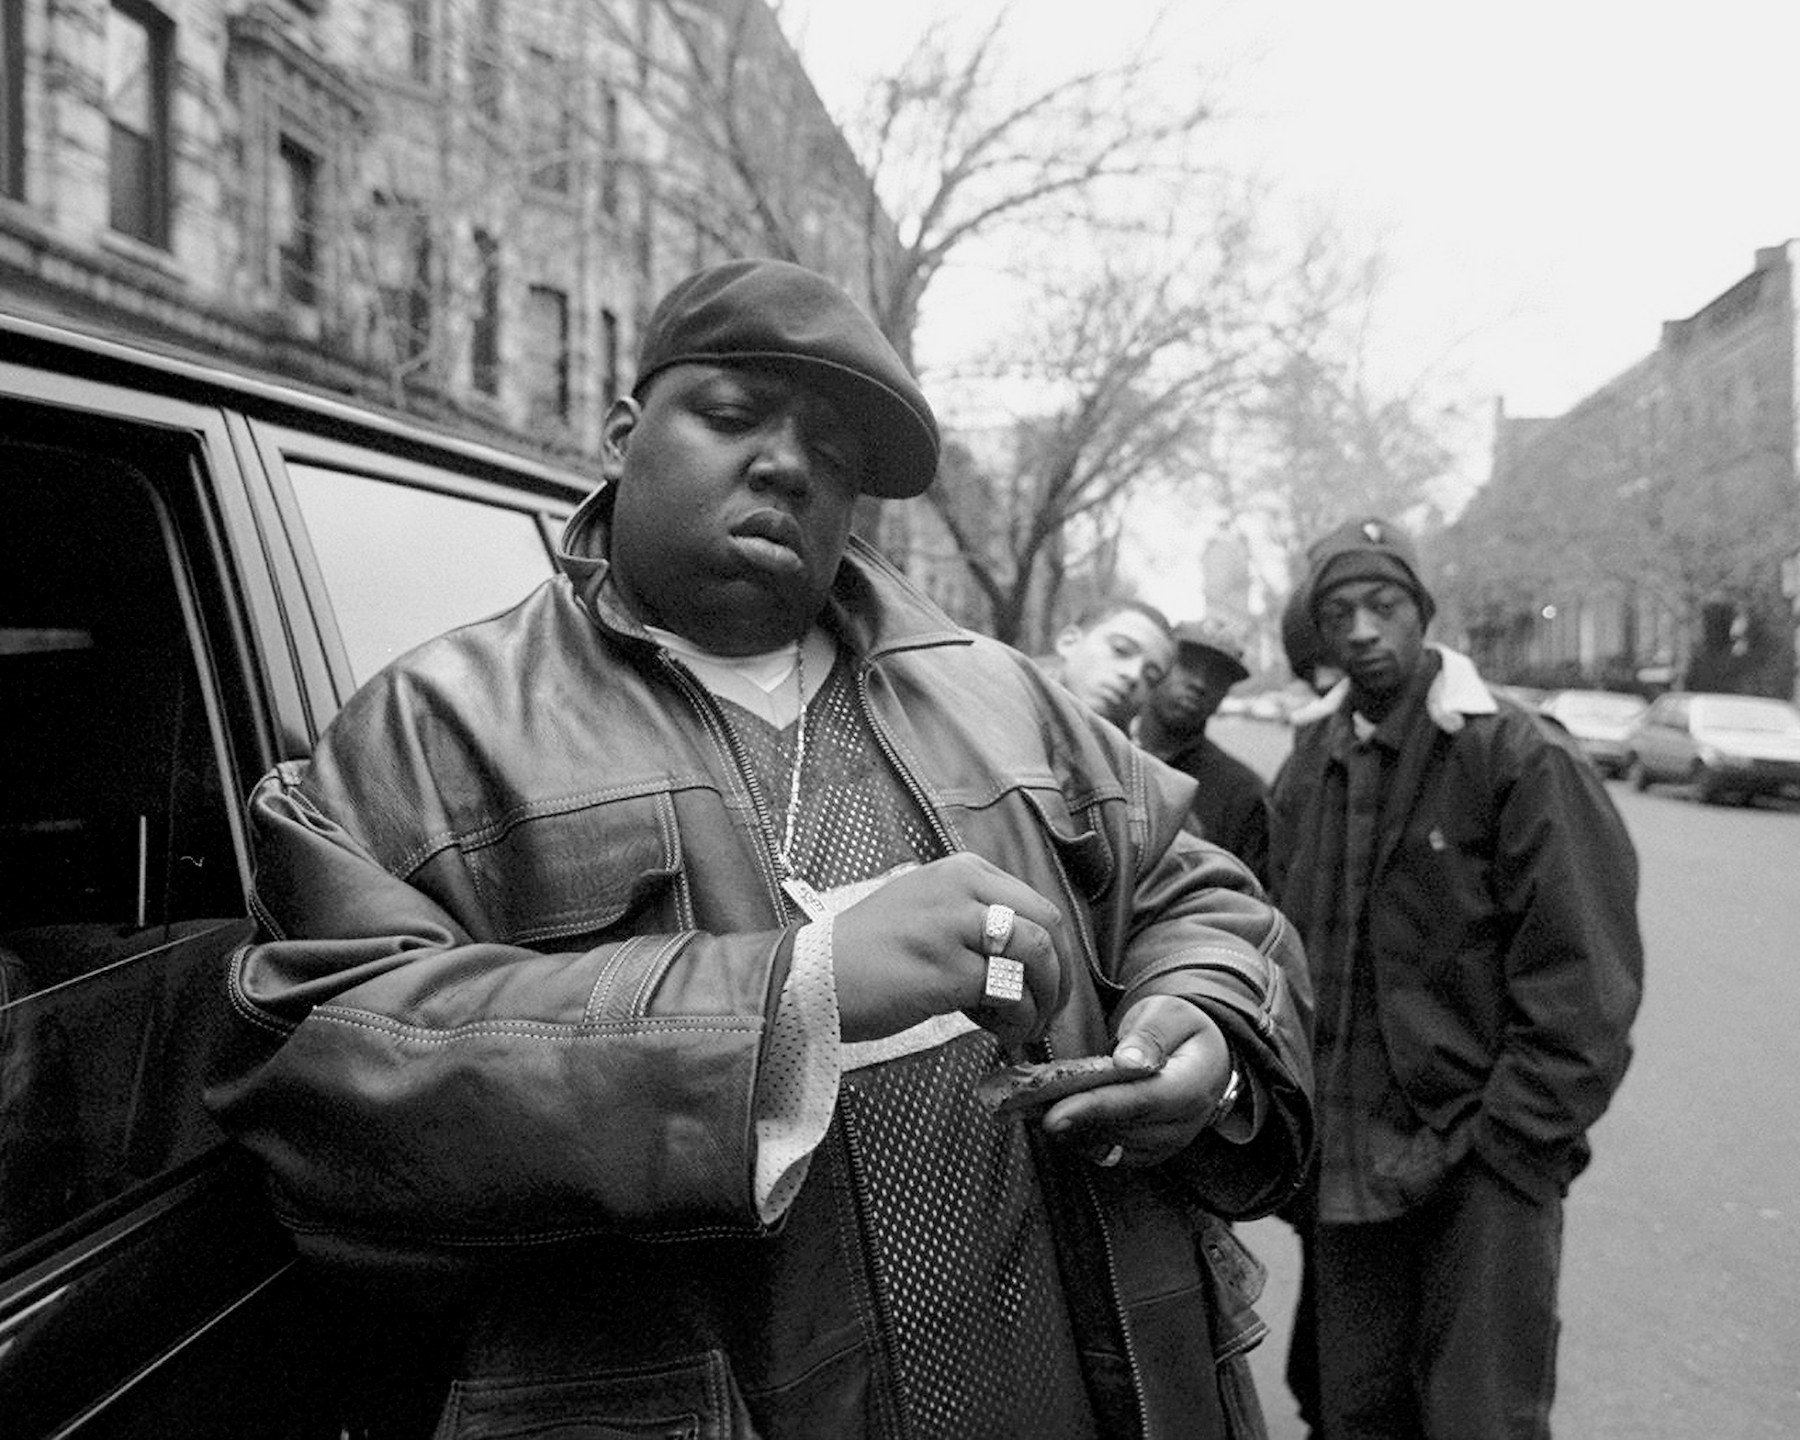 The Notorious B.I.G., who was launched to stardom thanks to a magazine column, posing for a photo